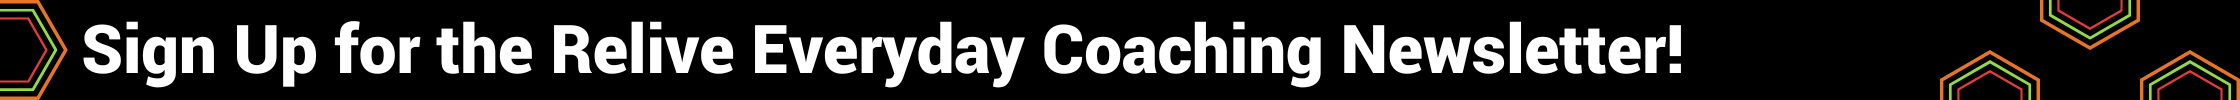 Sign Up for the Relive Everyday Coaching Newsletter!